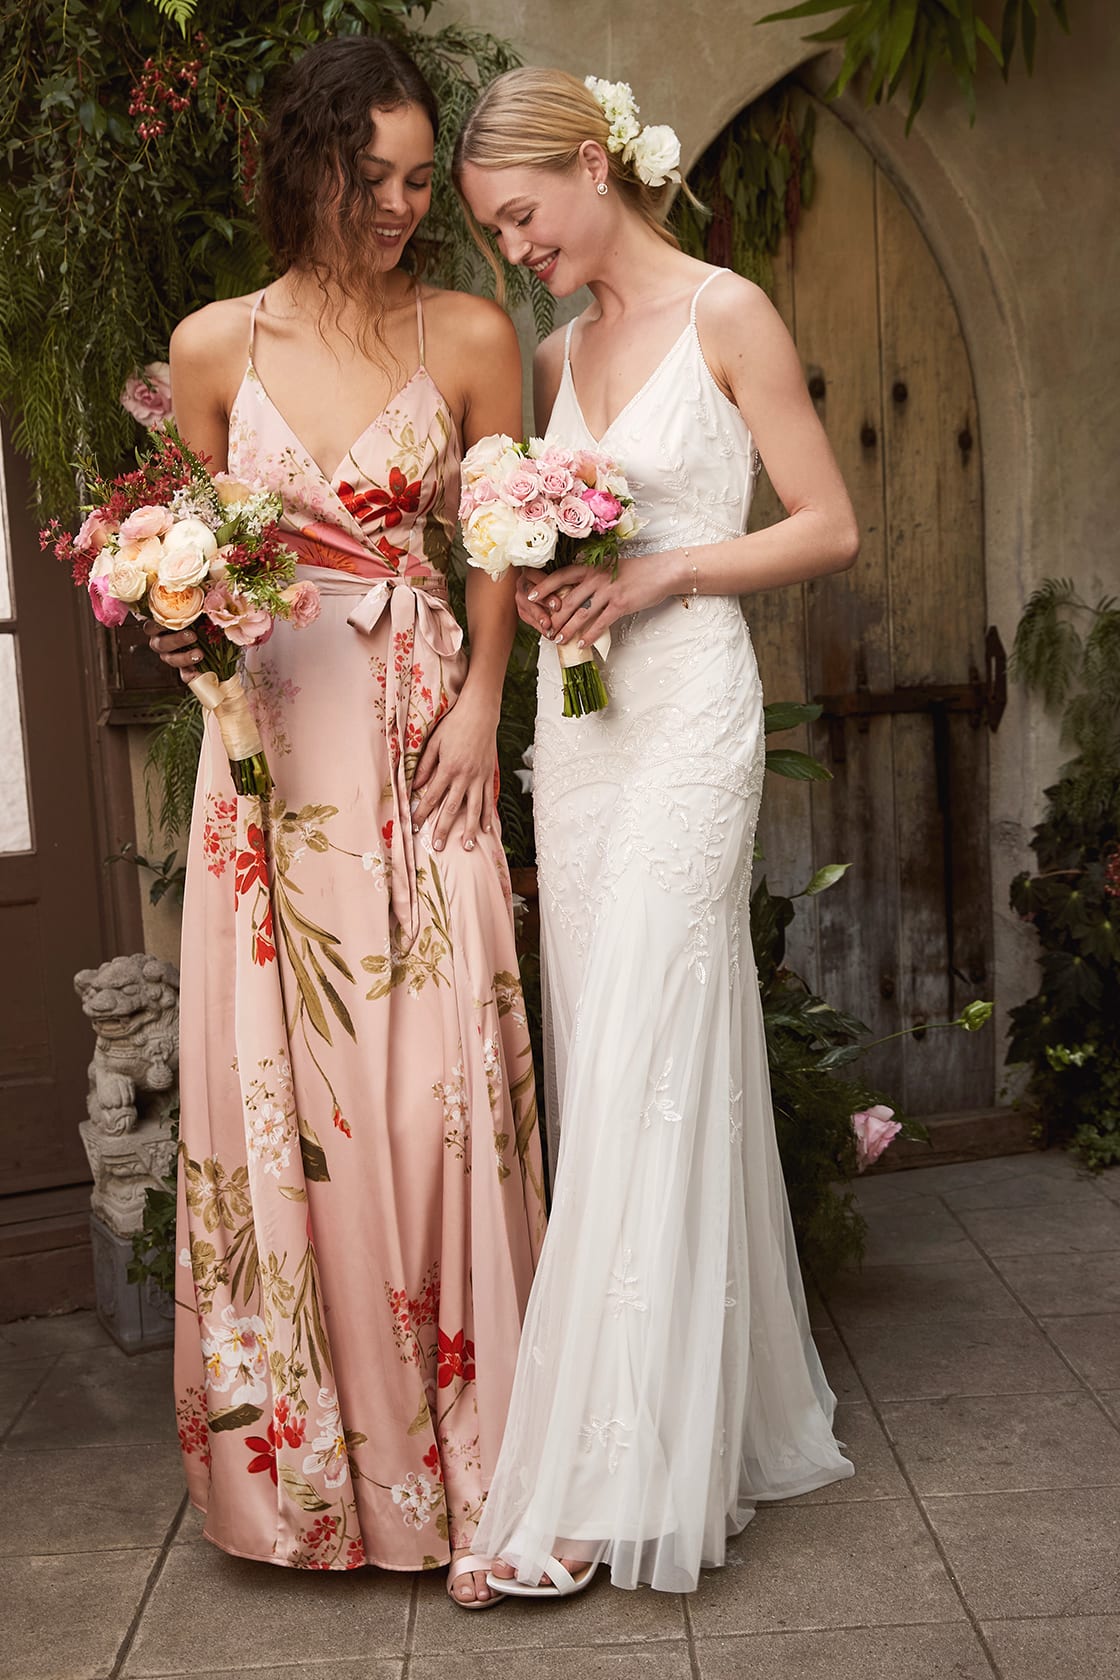 Light Pink Floral Bridesmaid Dress and Maid of Honor Dress for Spring Wedding or Beach Wedding